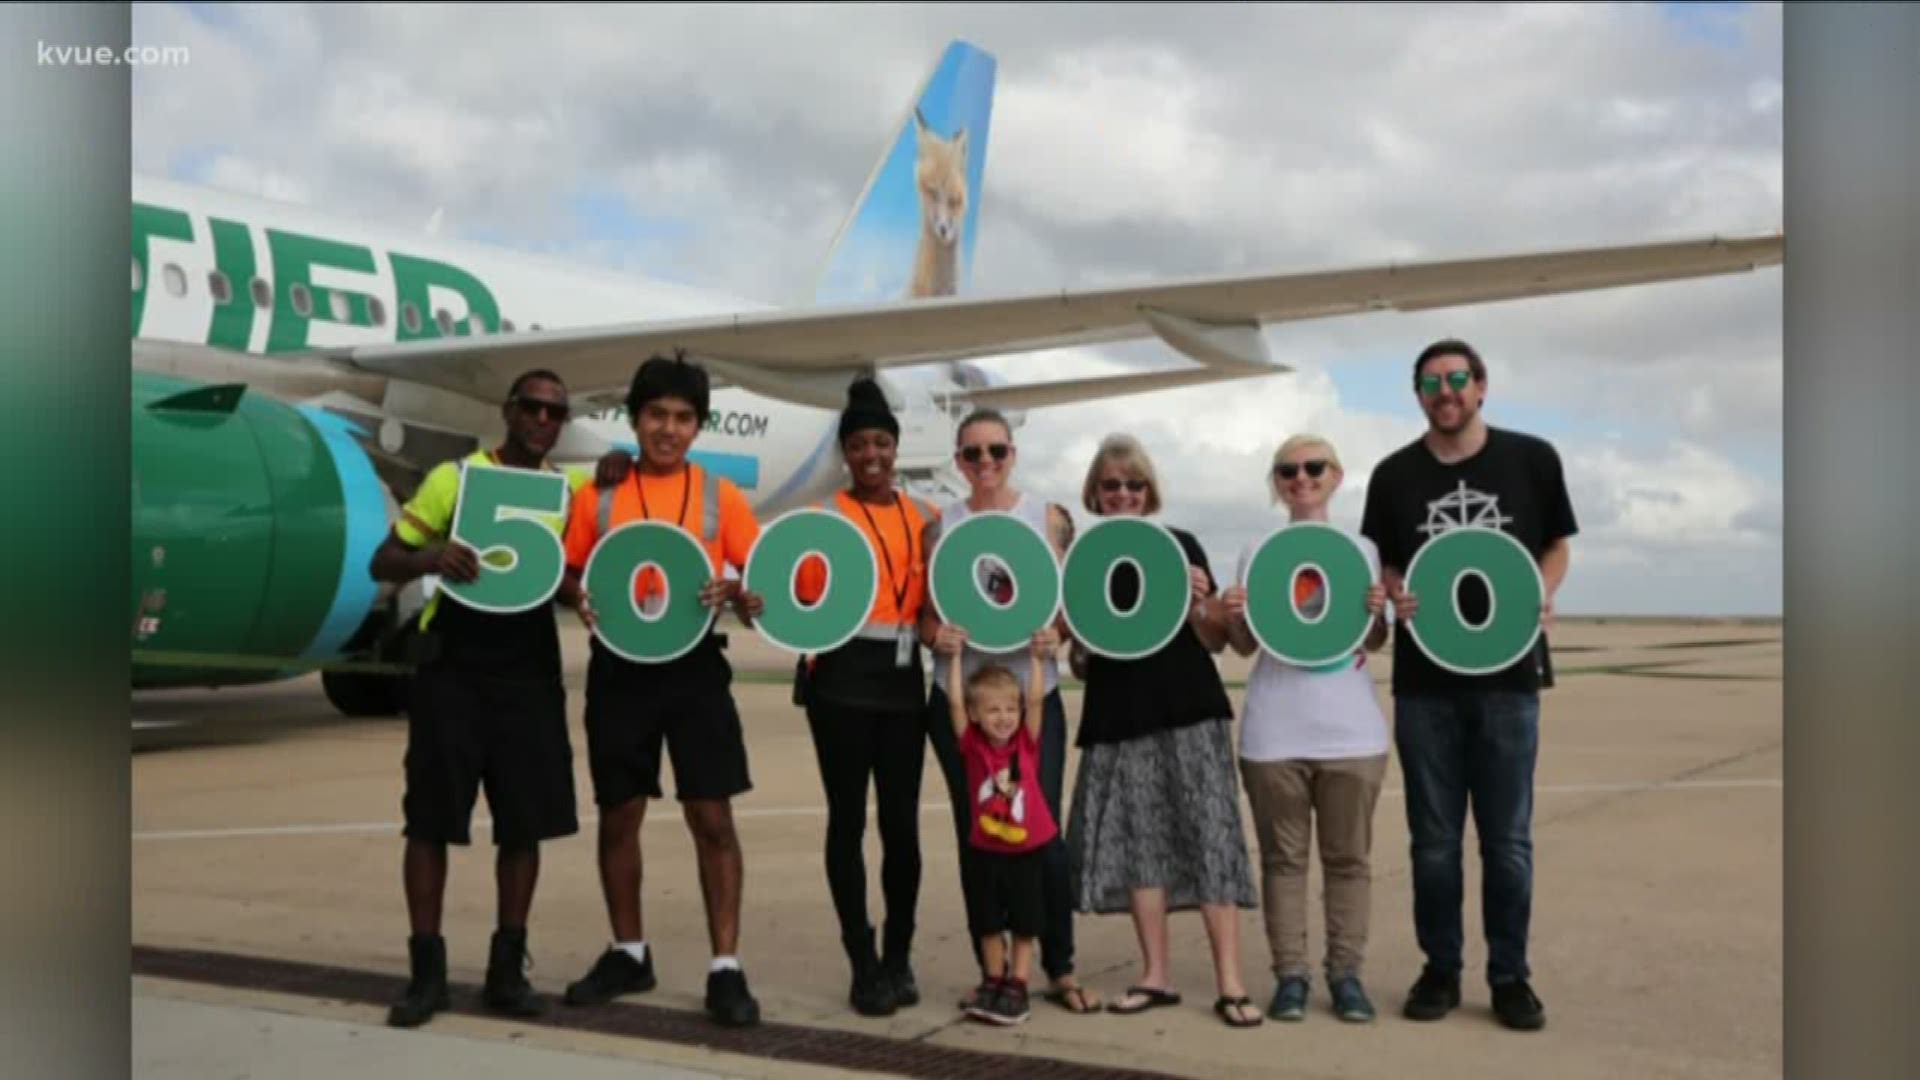 Frontier Airlines celebrated its five millionth passenger to fly in or out of Austin's airport.